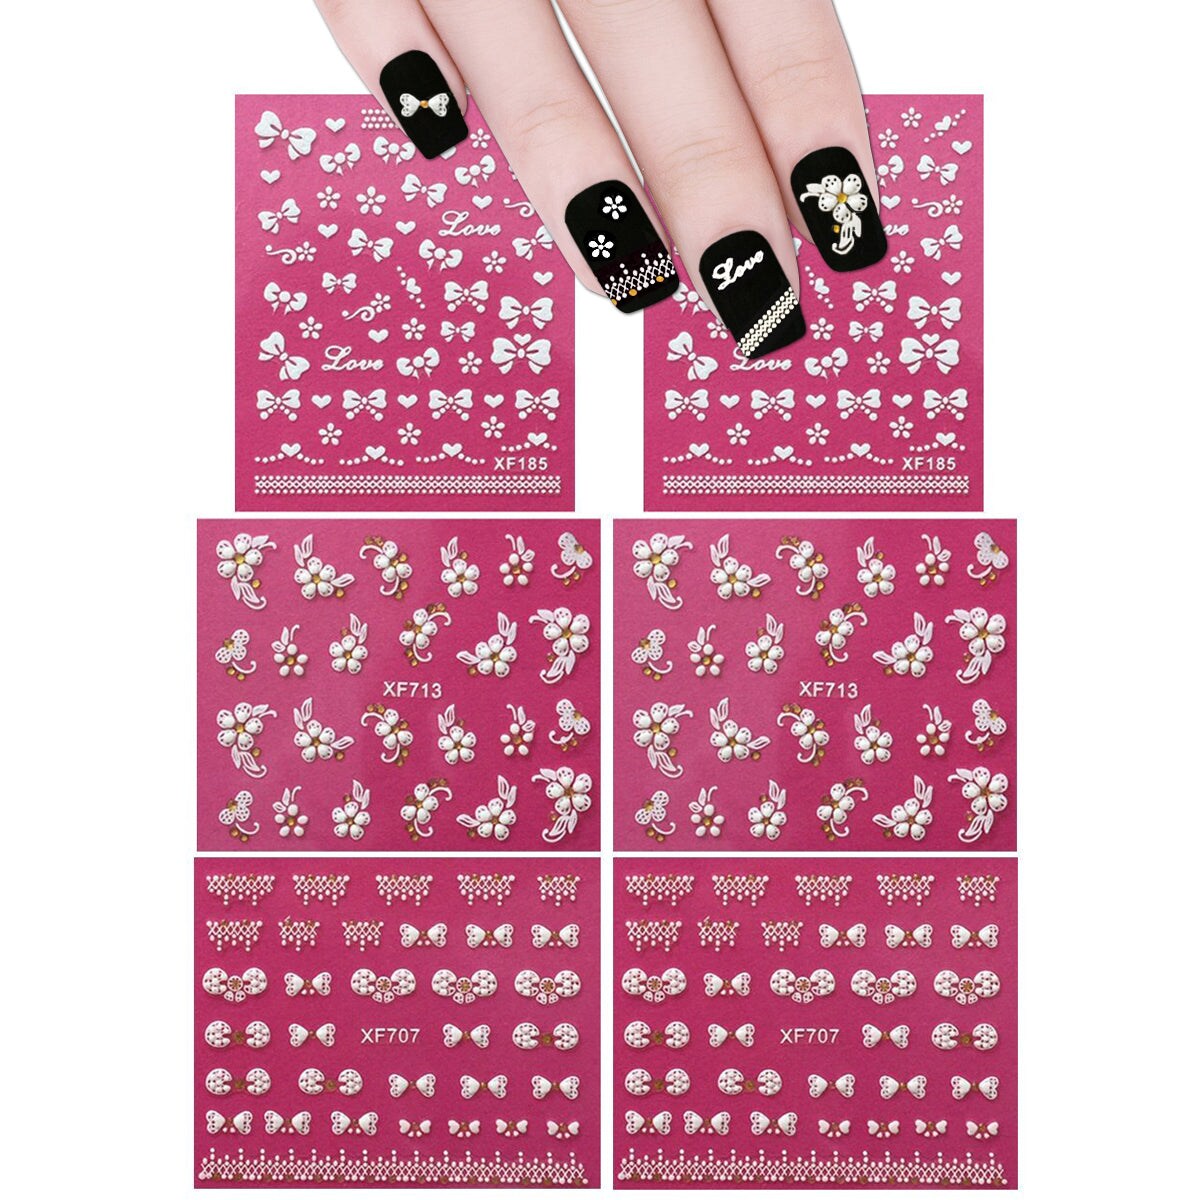 Wrapables Fingernail Stickers Nail Art Nail Stickers Self-Adhesive Nail Stickers 3D Nail Decals - Bows, Hearts &#x26; Flowers (3 Designs/6 Sheets)